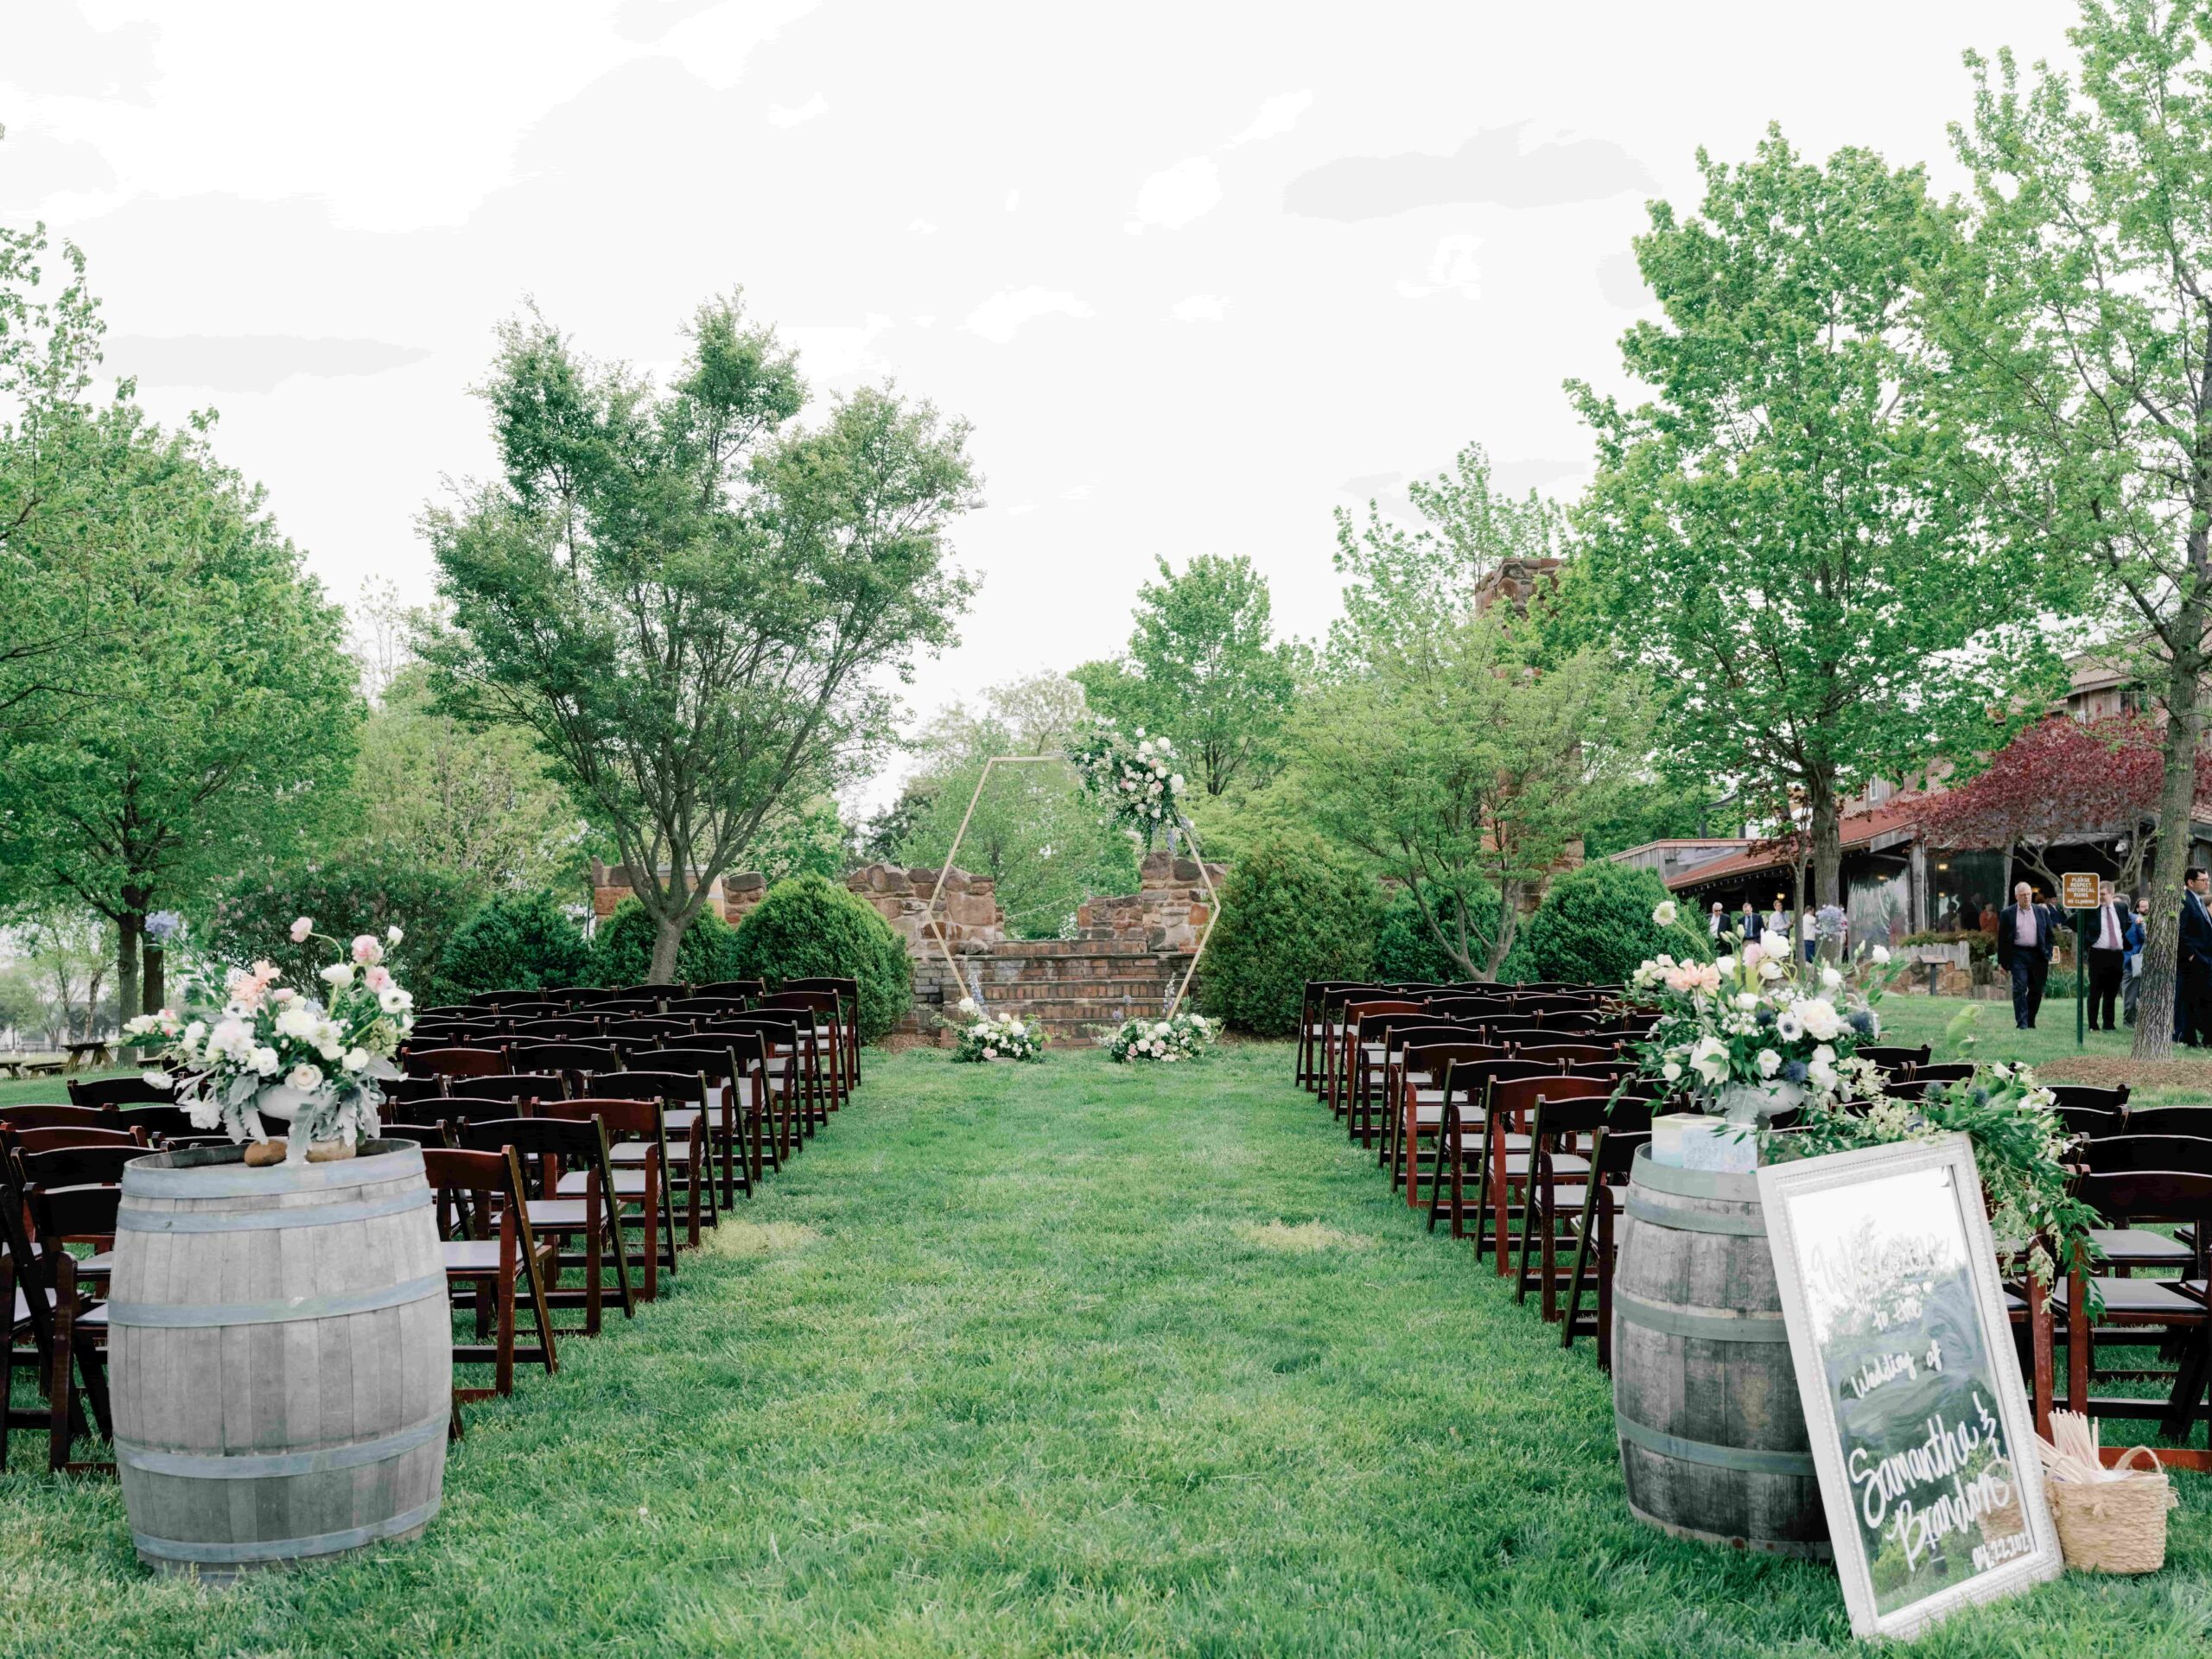 Rustic outdoor setting for a wedding at a winery. Rustic chairs, barrels on the bridal walk path with flowers on top.